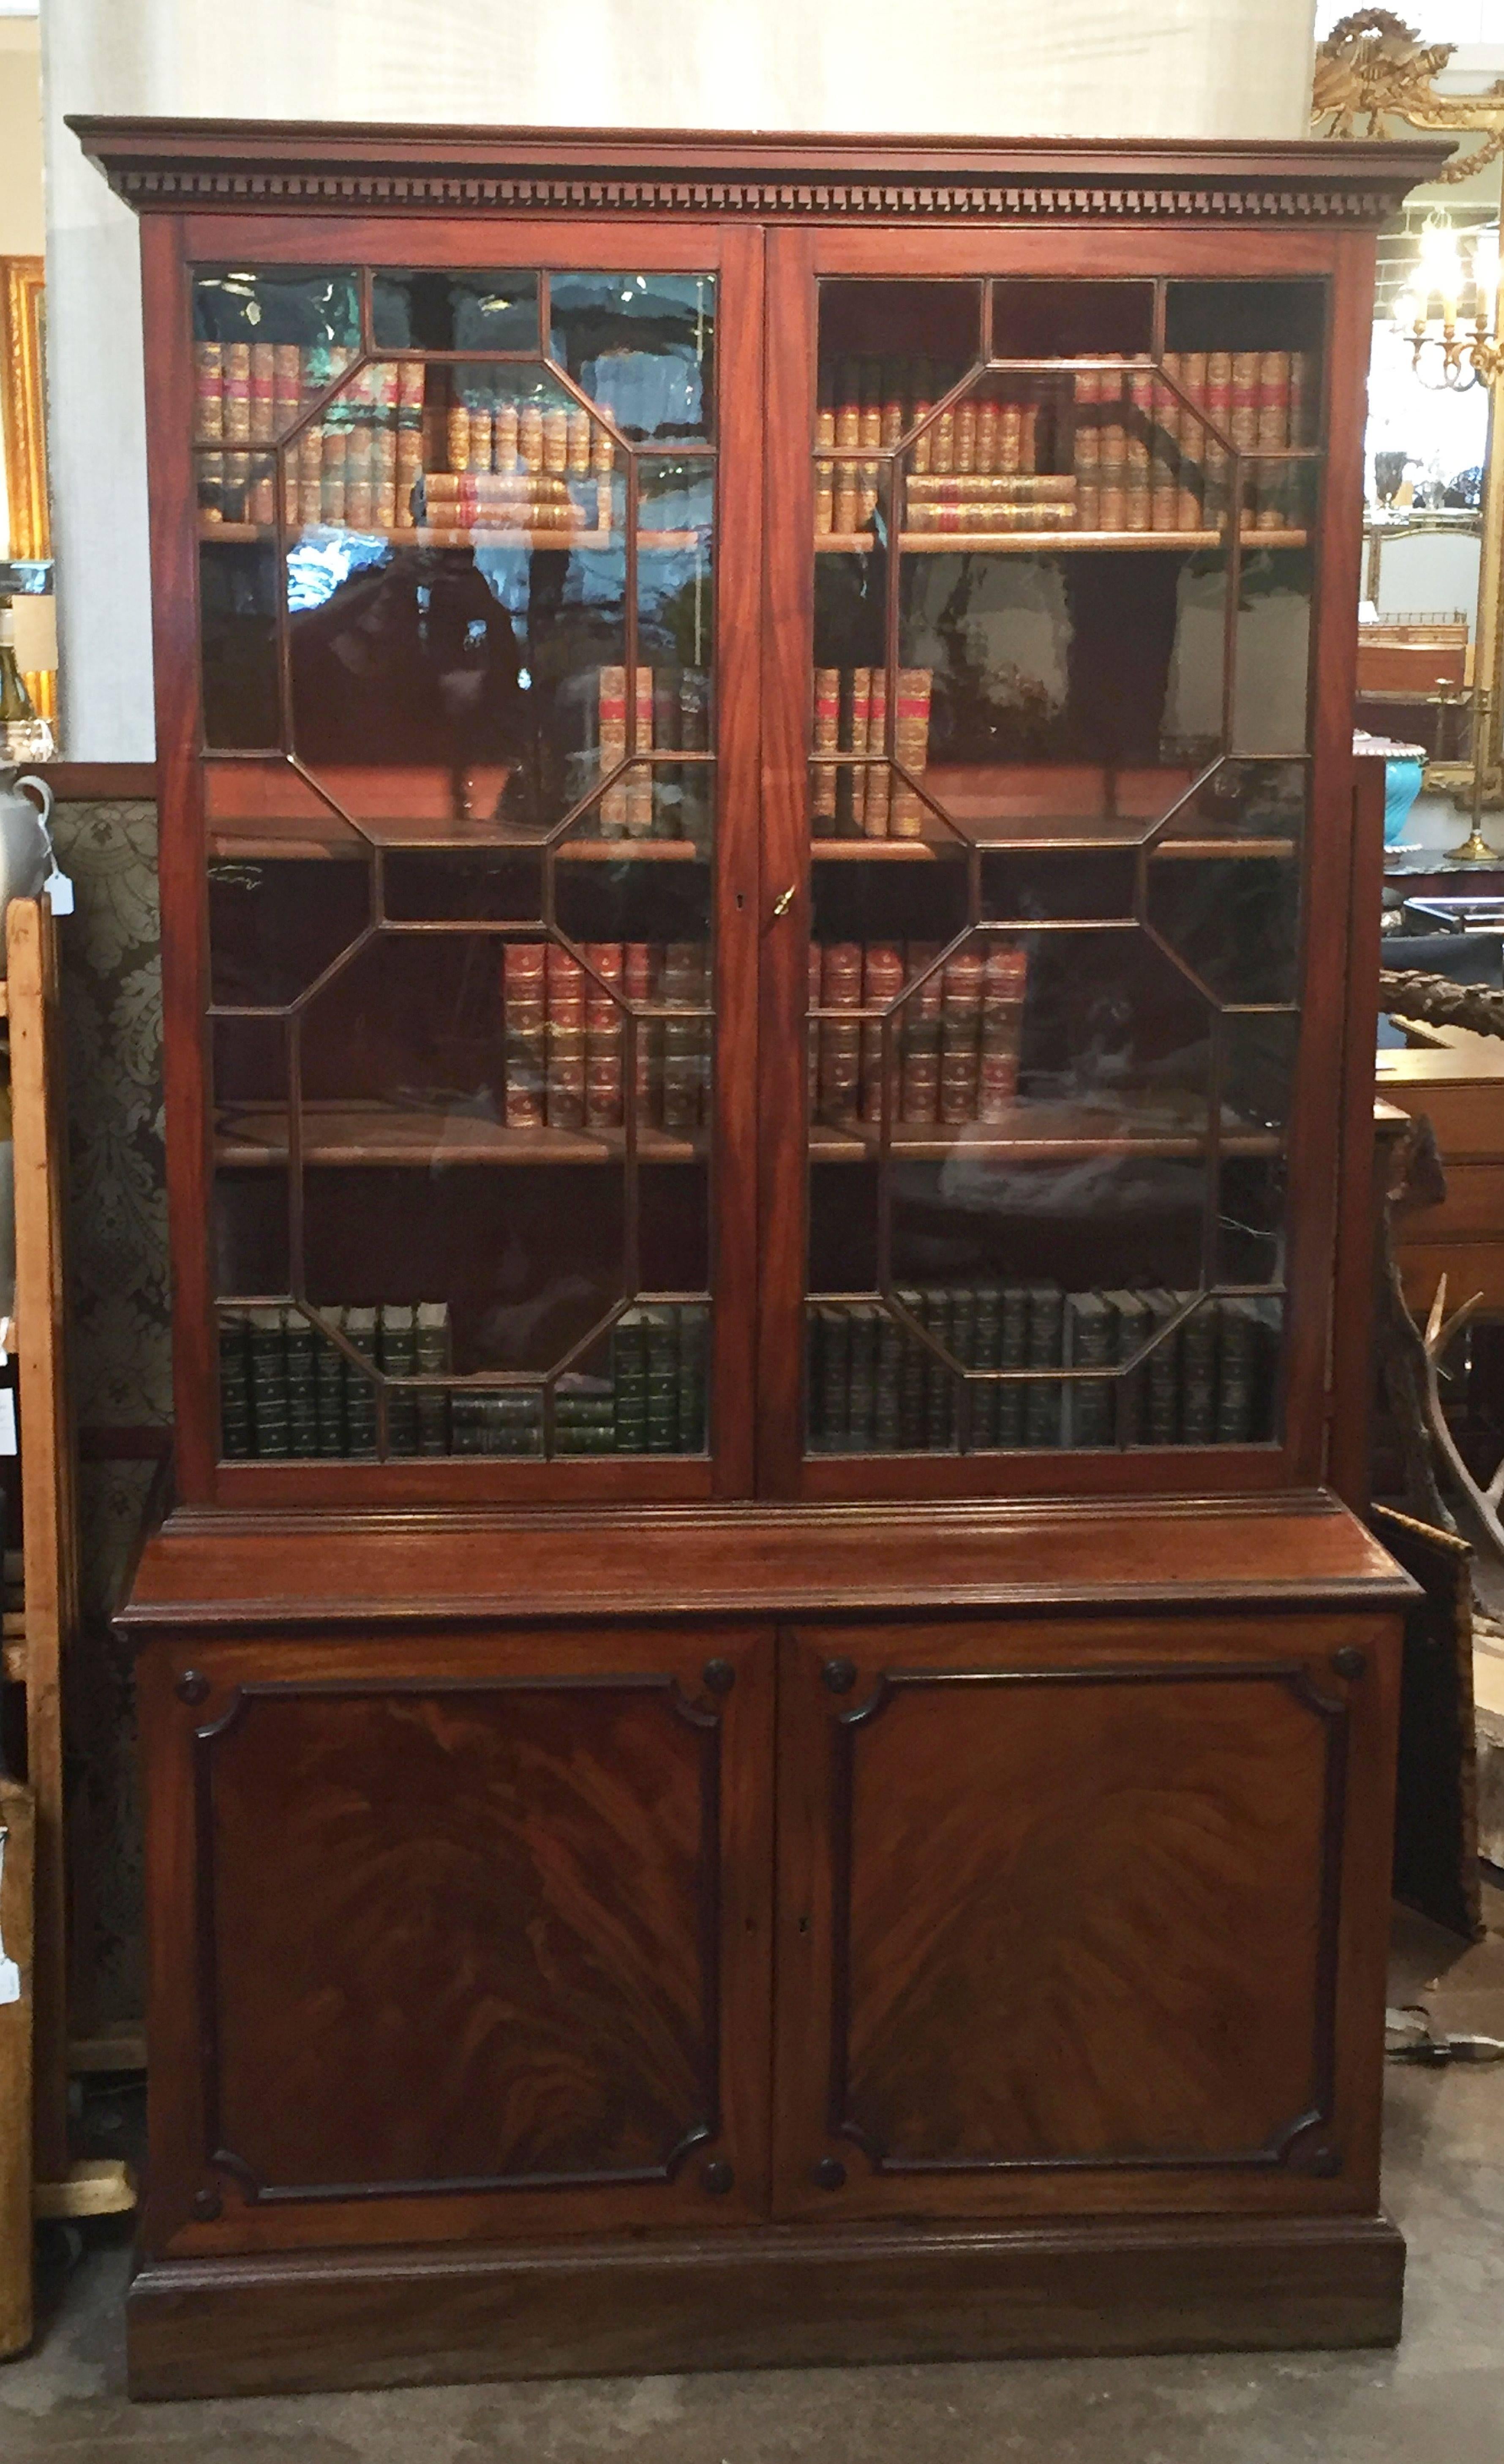 A fine large English bookcase of mahogany, featuring an upper tier with cornice and dentile moulding, two astragal glazed doors enclosing three adjustable bookshelves and the lower cabinet with two-paneled doors of flame-cut mahogany, fitted with